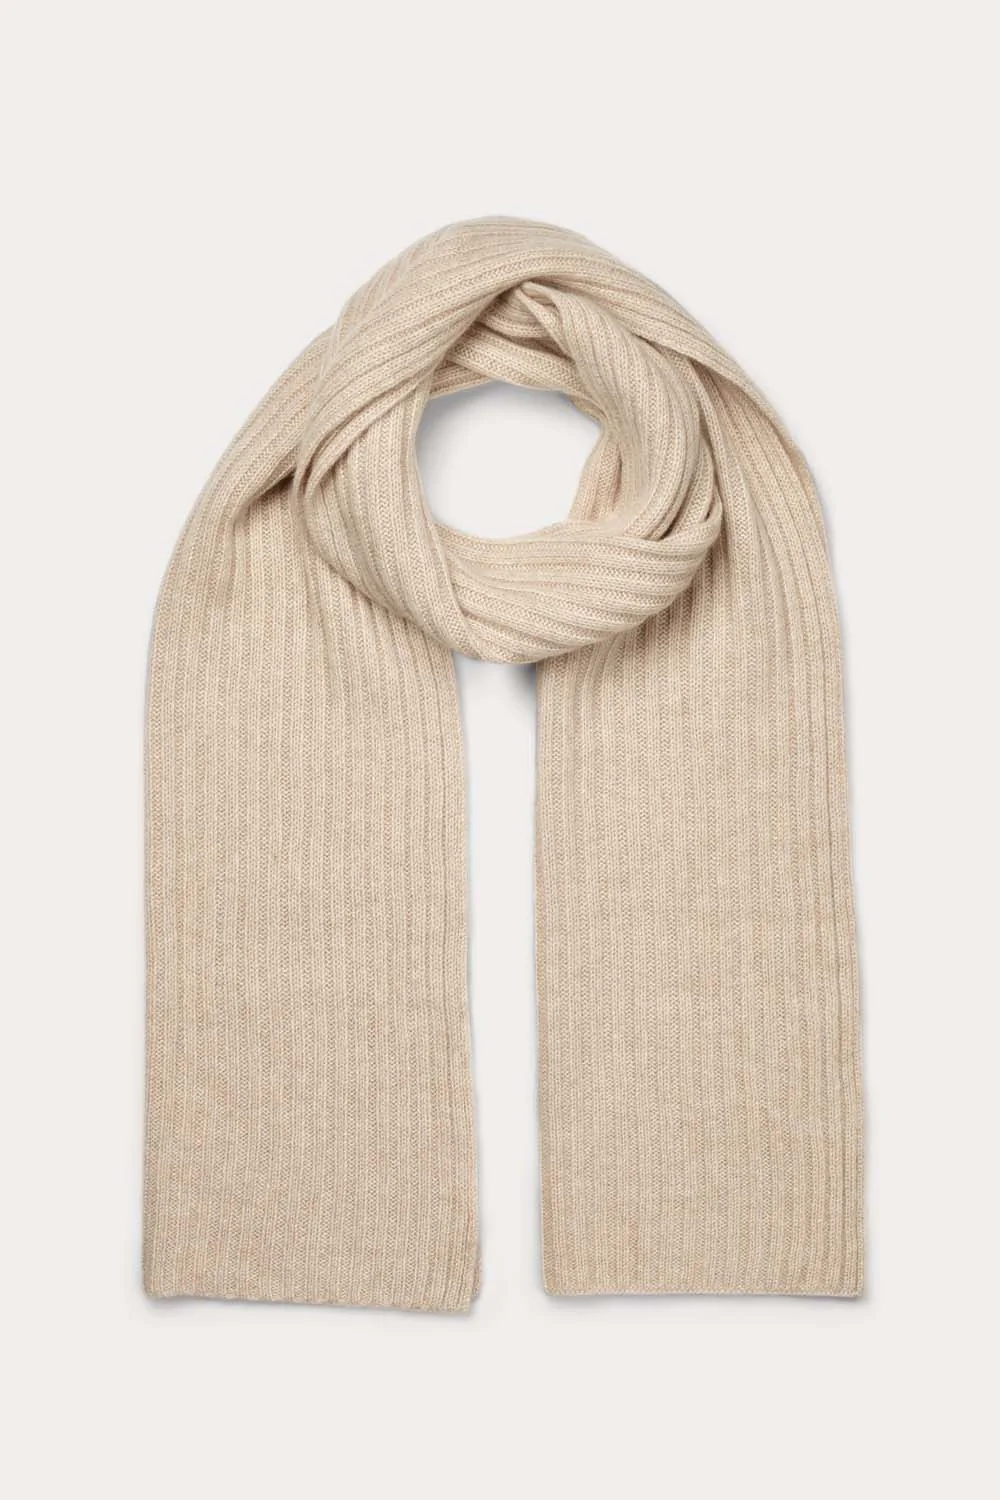 Oatmeal Cashmere Scarf - Buy and Slay